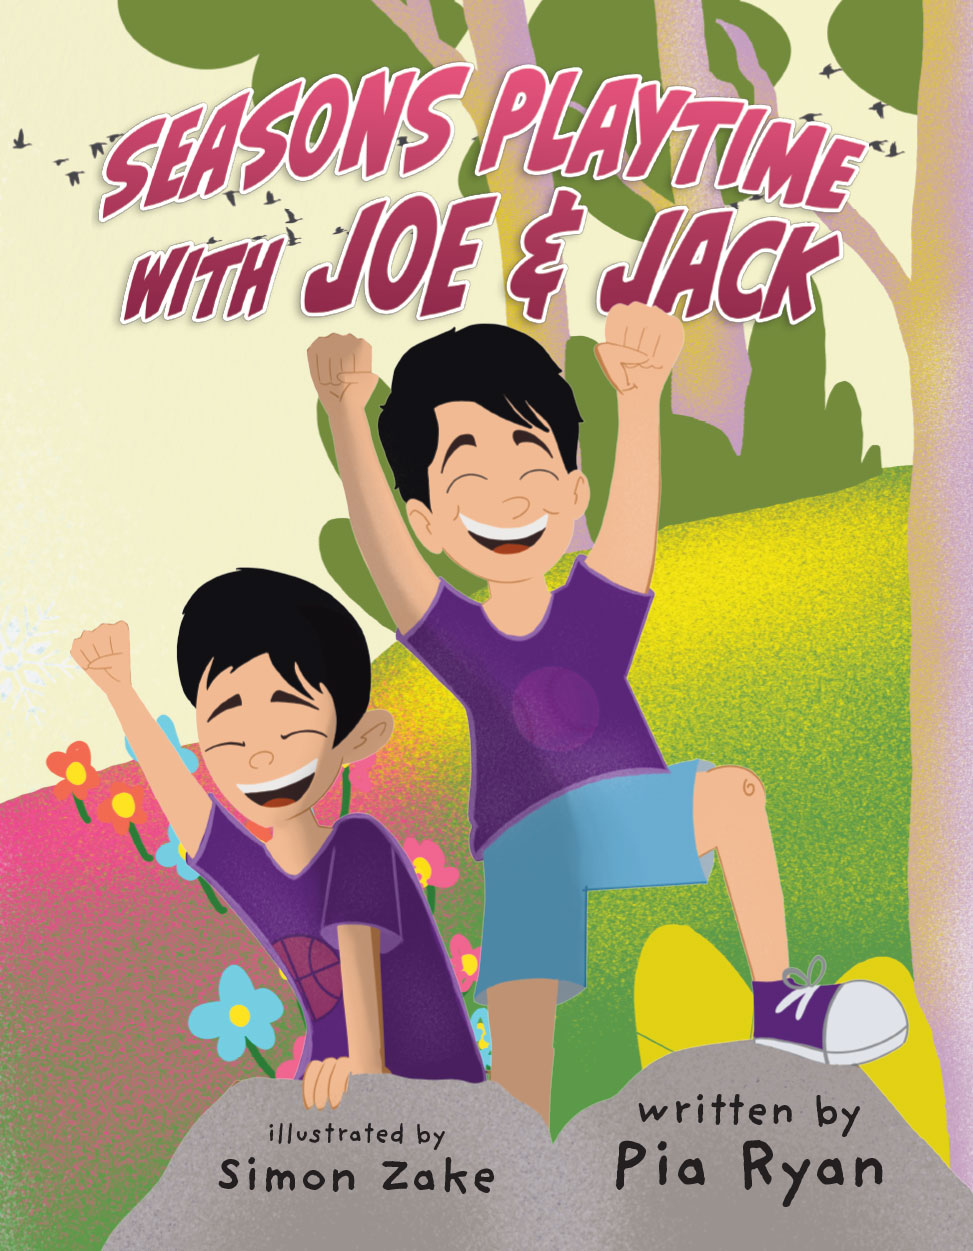 "Seasons Playtime with Joe and Jack" By Pia Ryan Book Cover